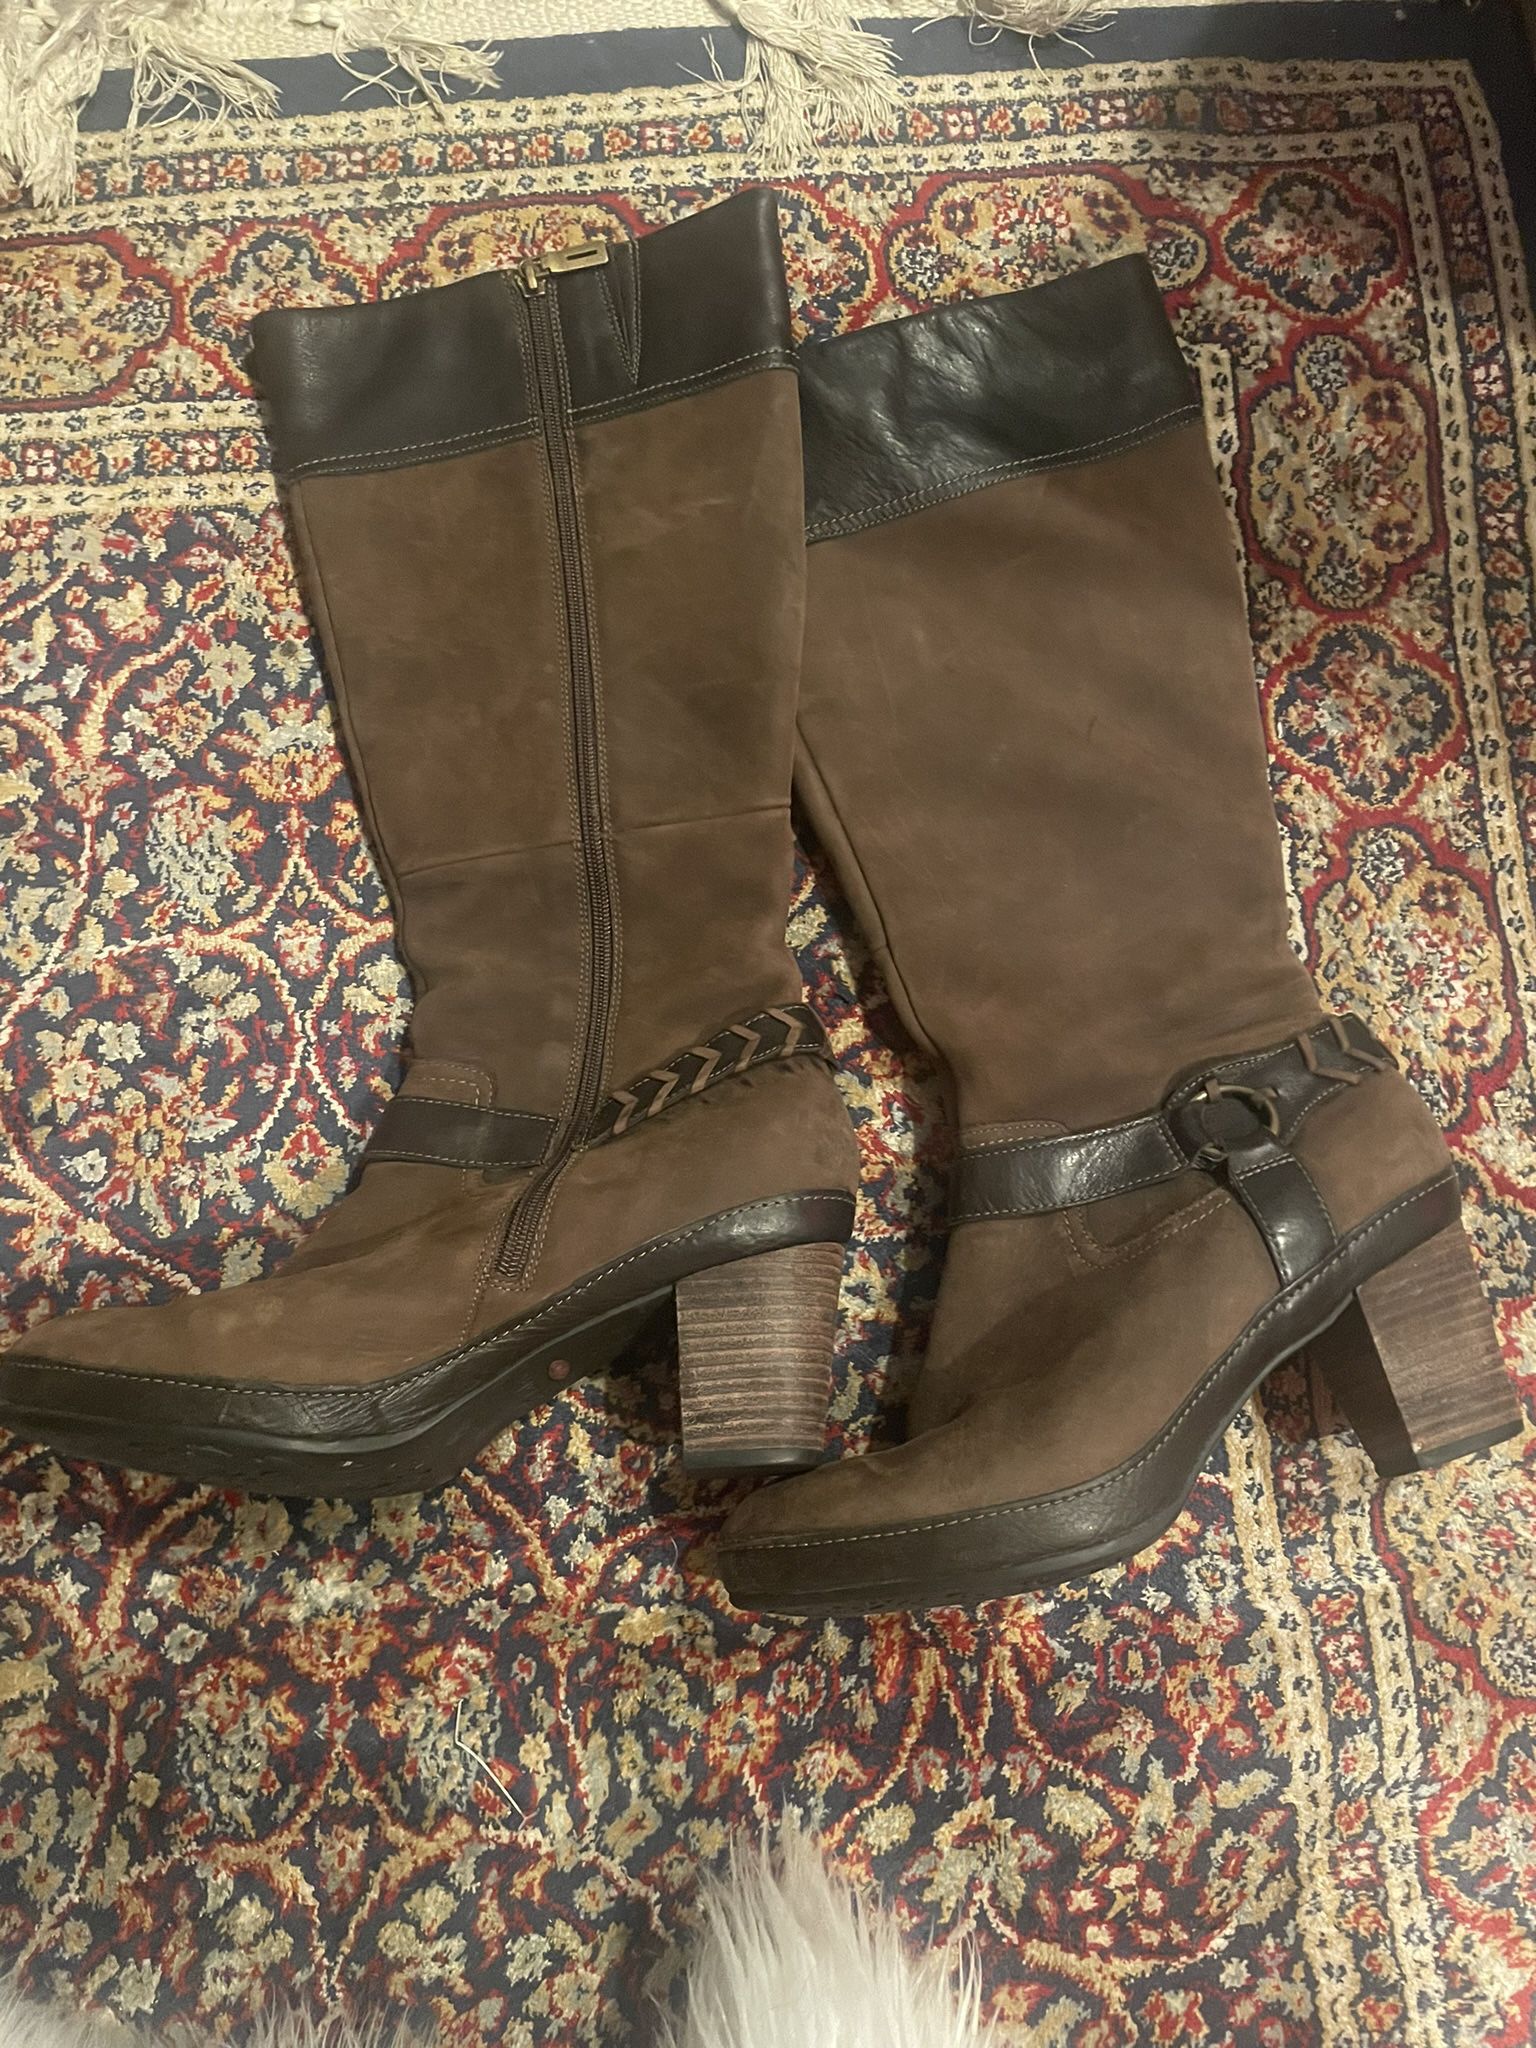 Women’s Knee High Boots Size 10 Brown Leather